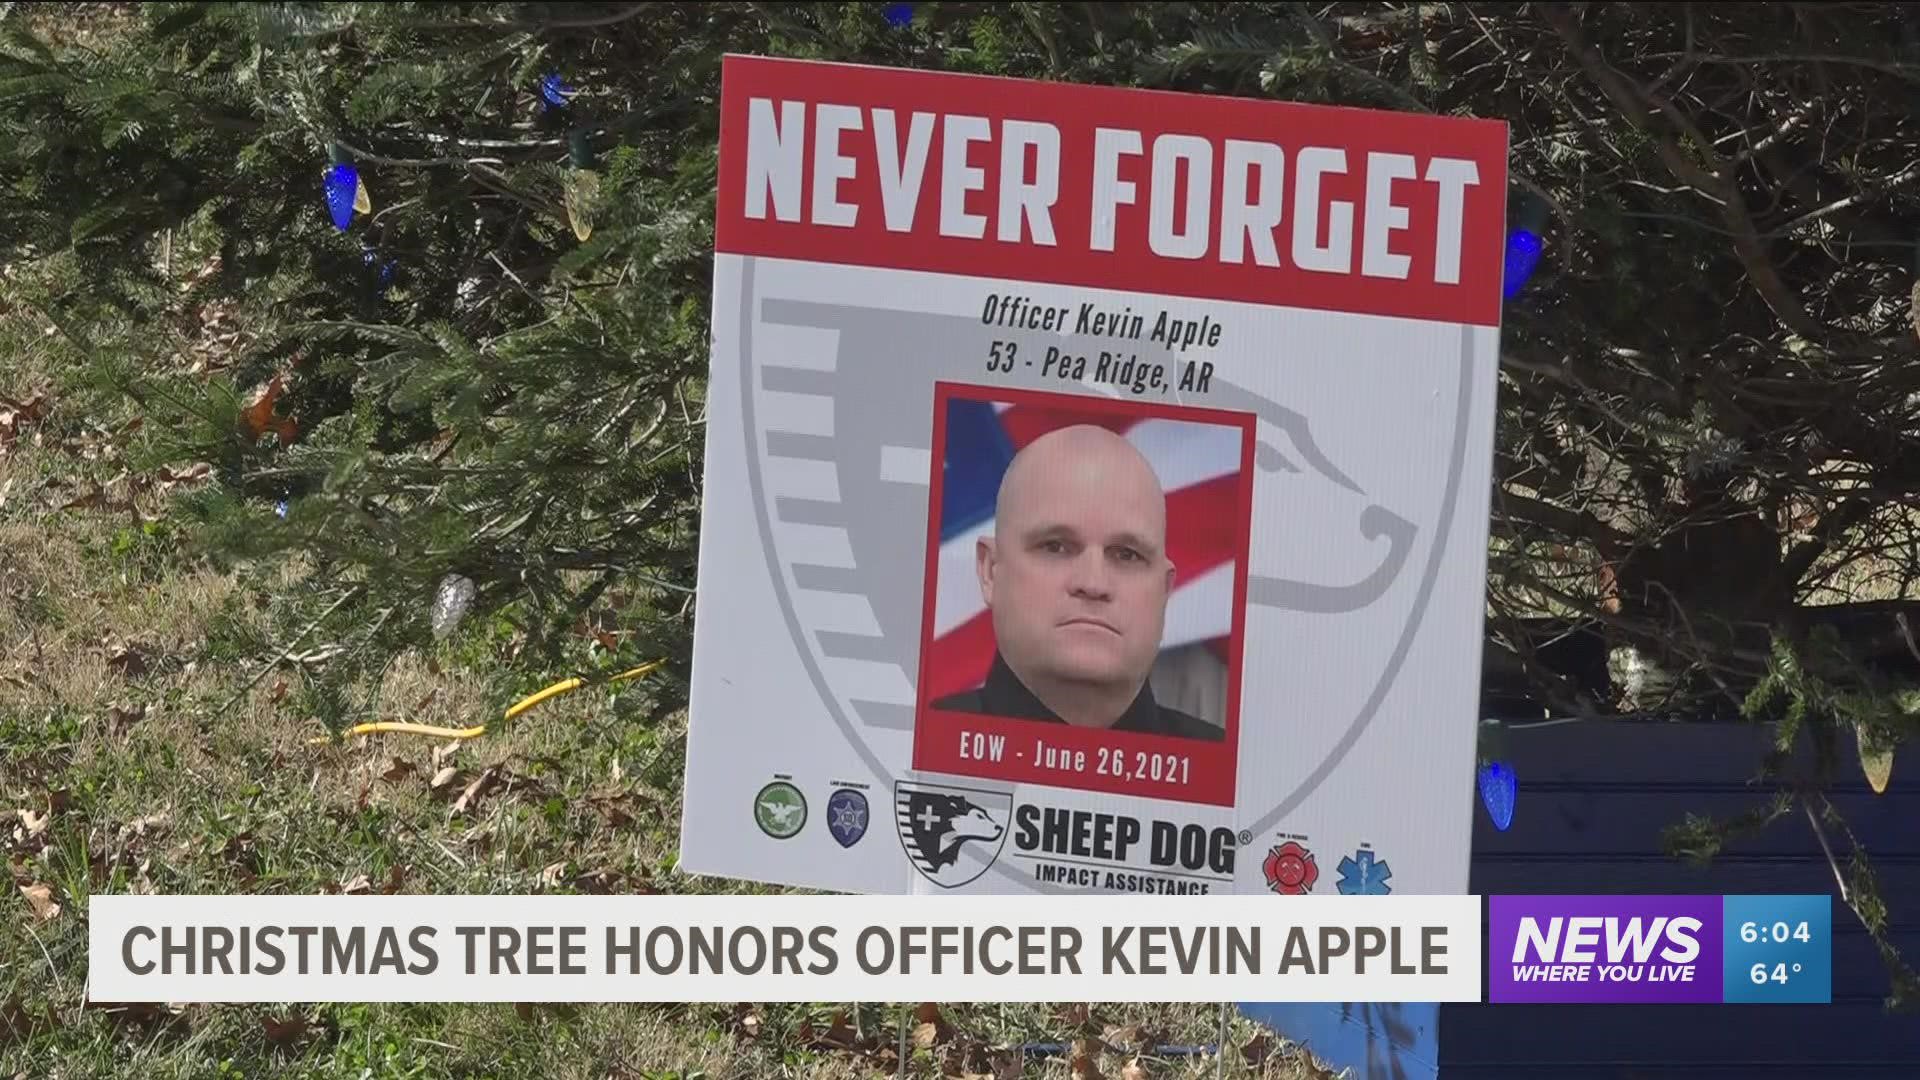 The community is invited to decorate the tree before Officer Kevin Apple day on Dec. 12.